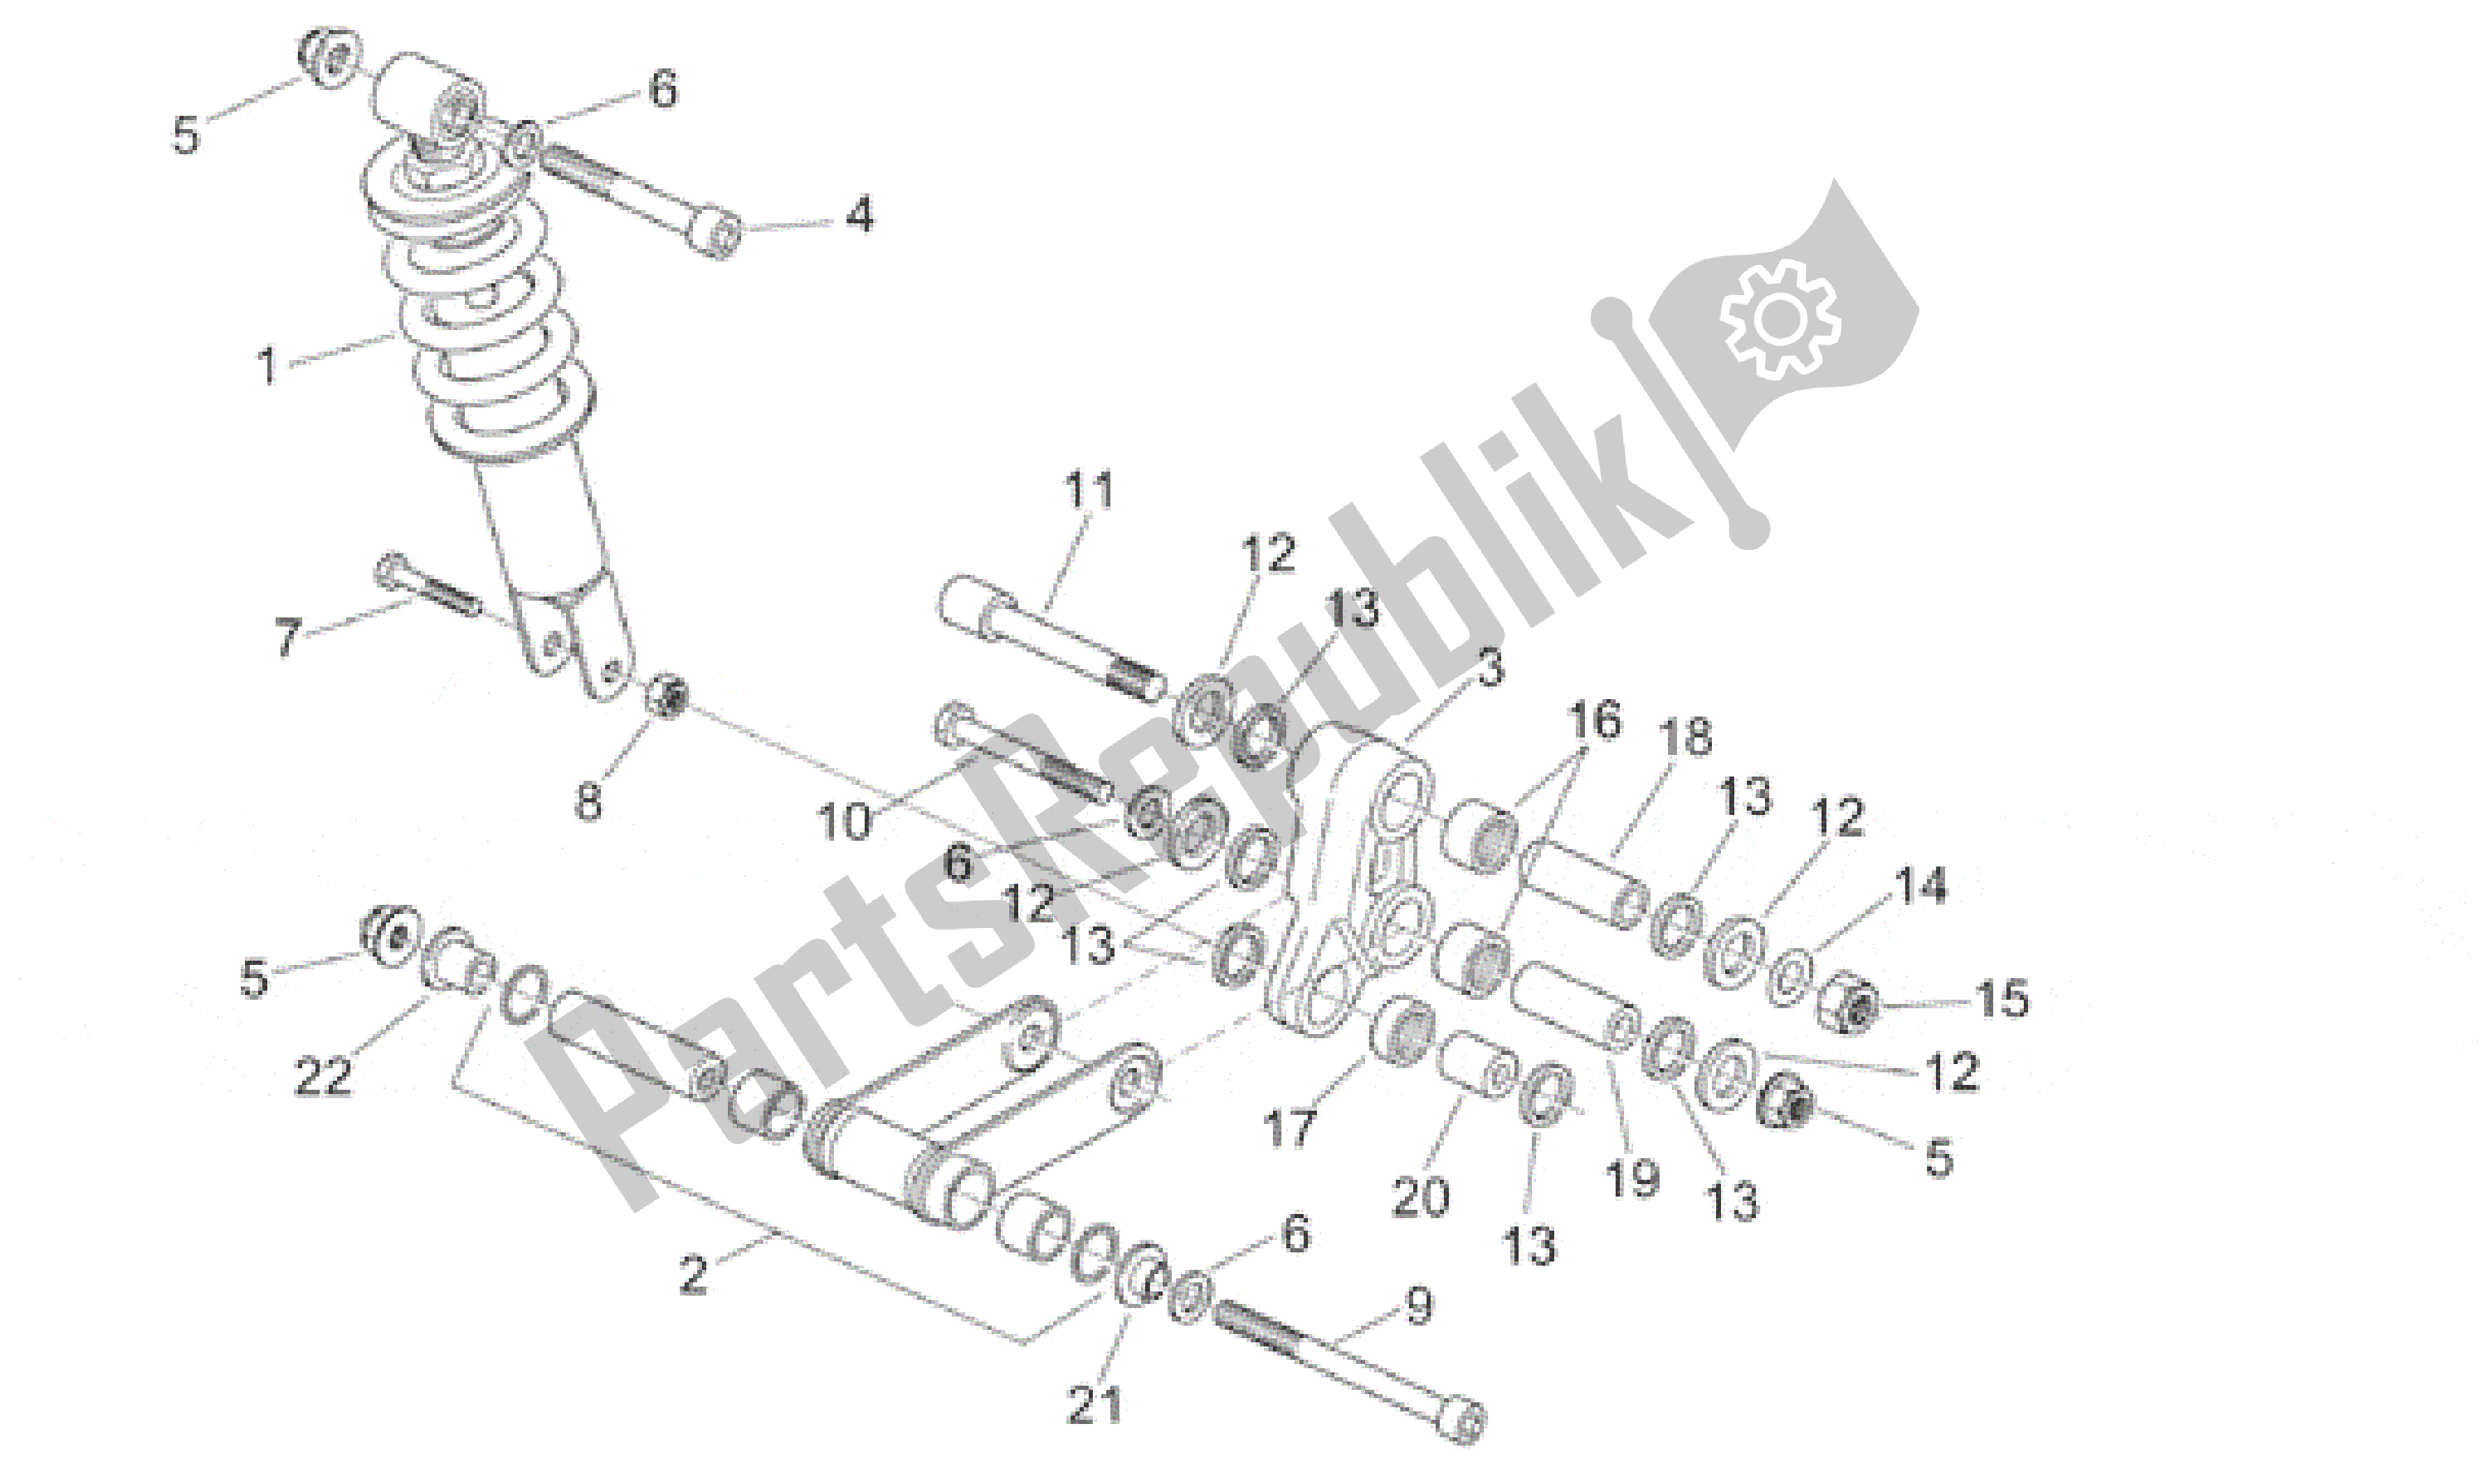 All parts for the Rear Shock Absorber of the Aprilia RS 125 1999 - 2001